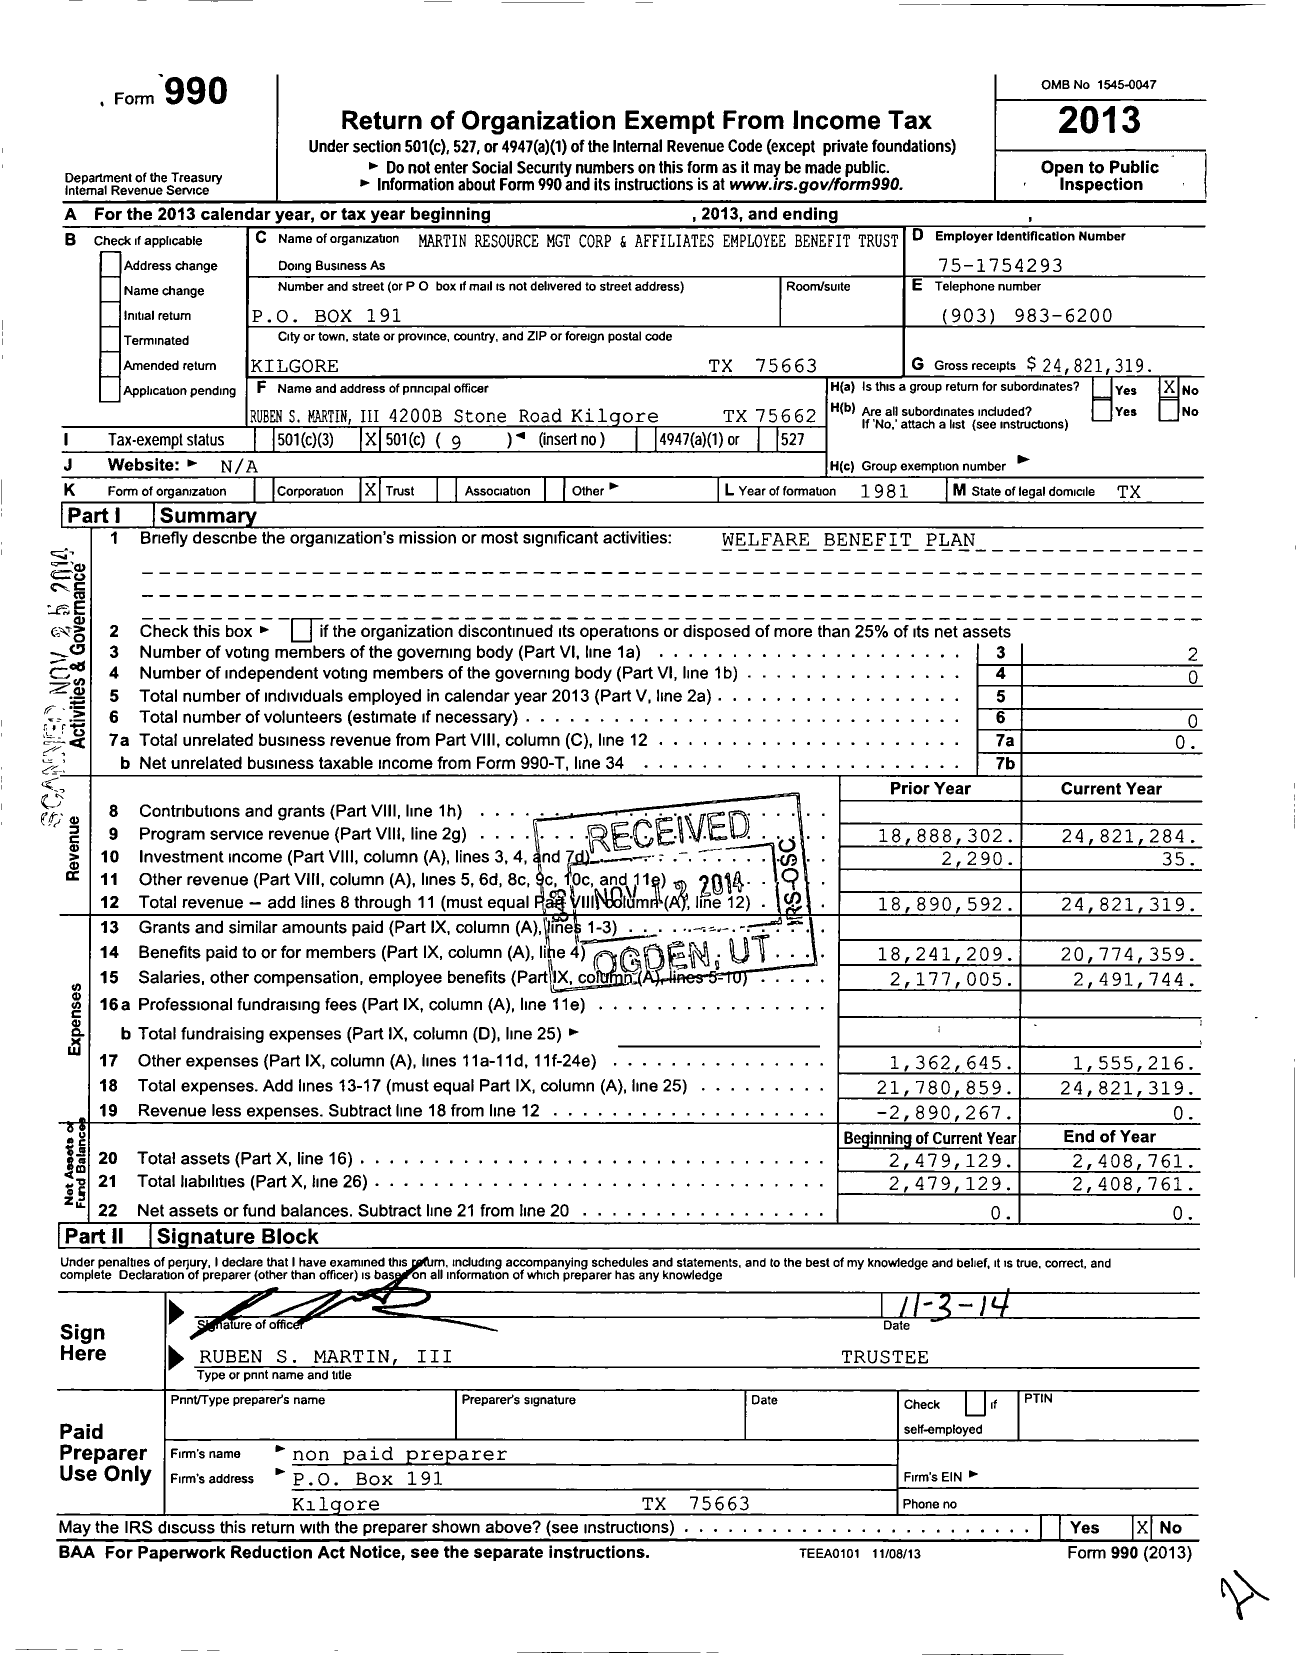 Image of first page of 2013 Form 990O for Martin Resource MGT Corp and Affiliates Employee Benefit Trust